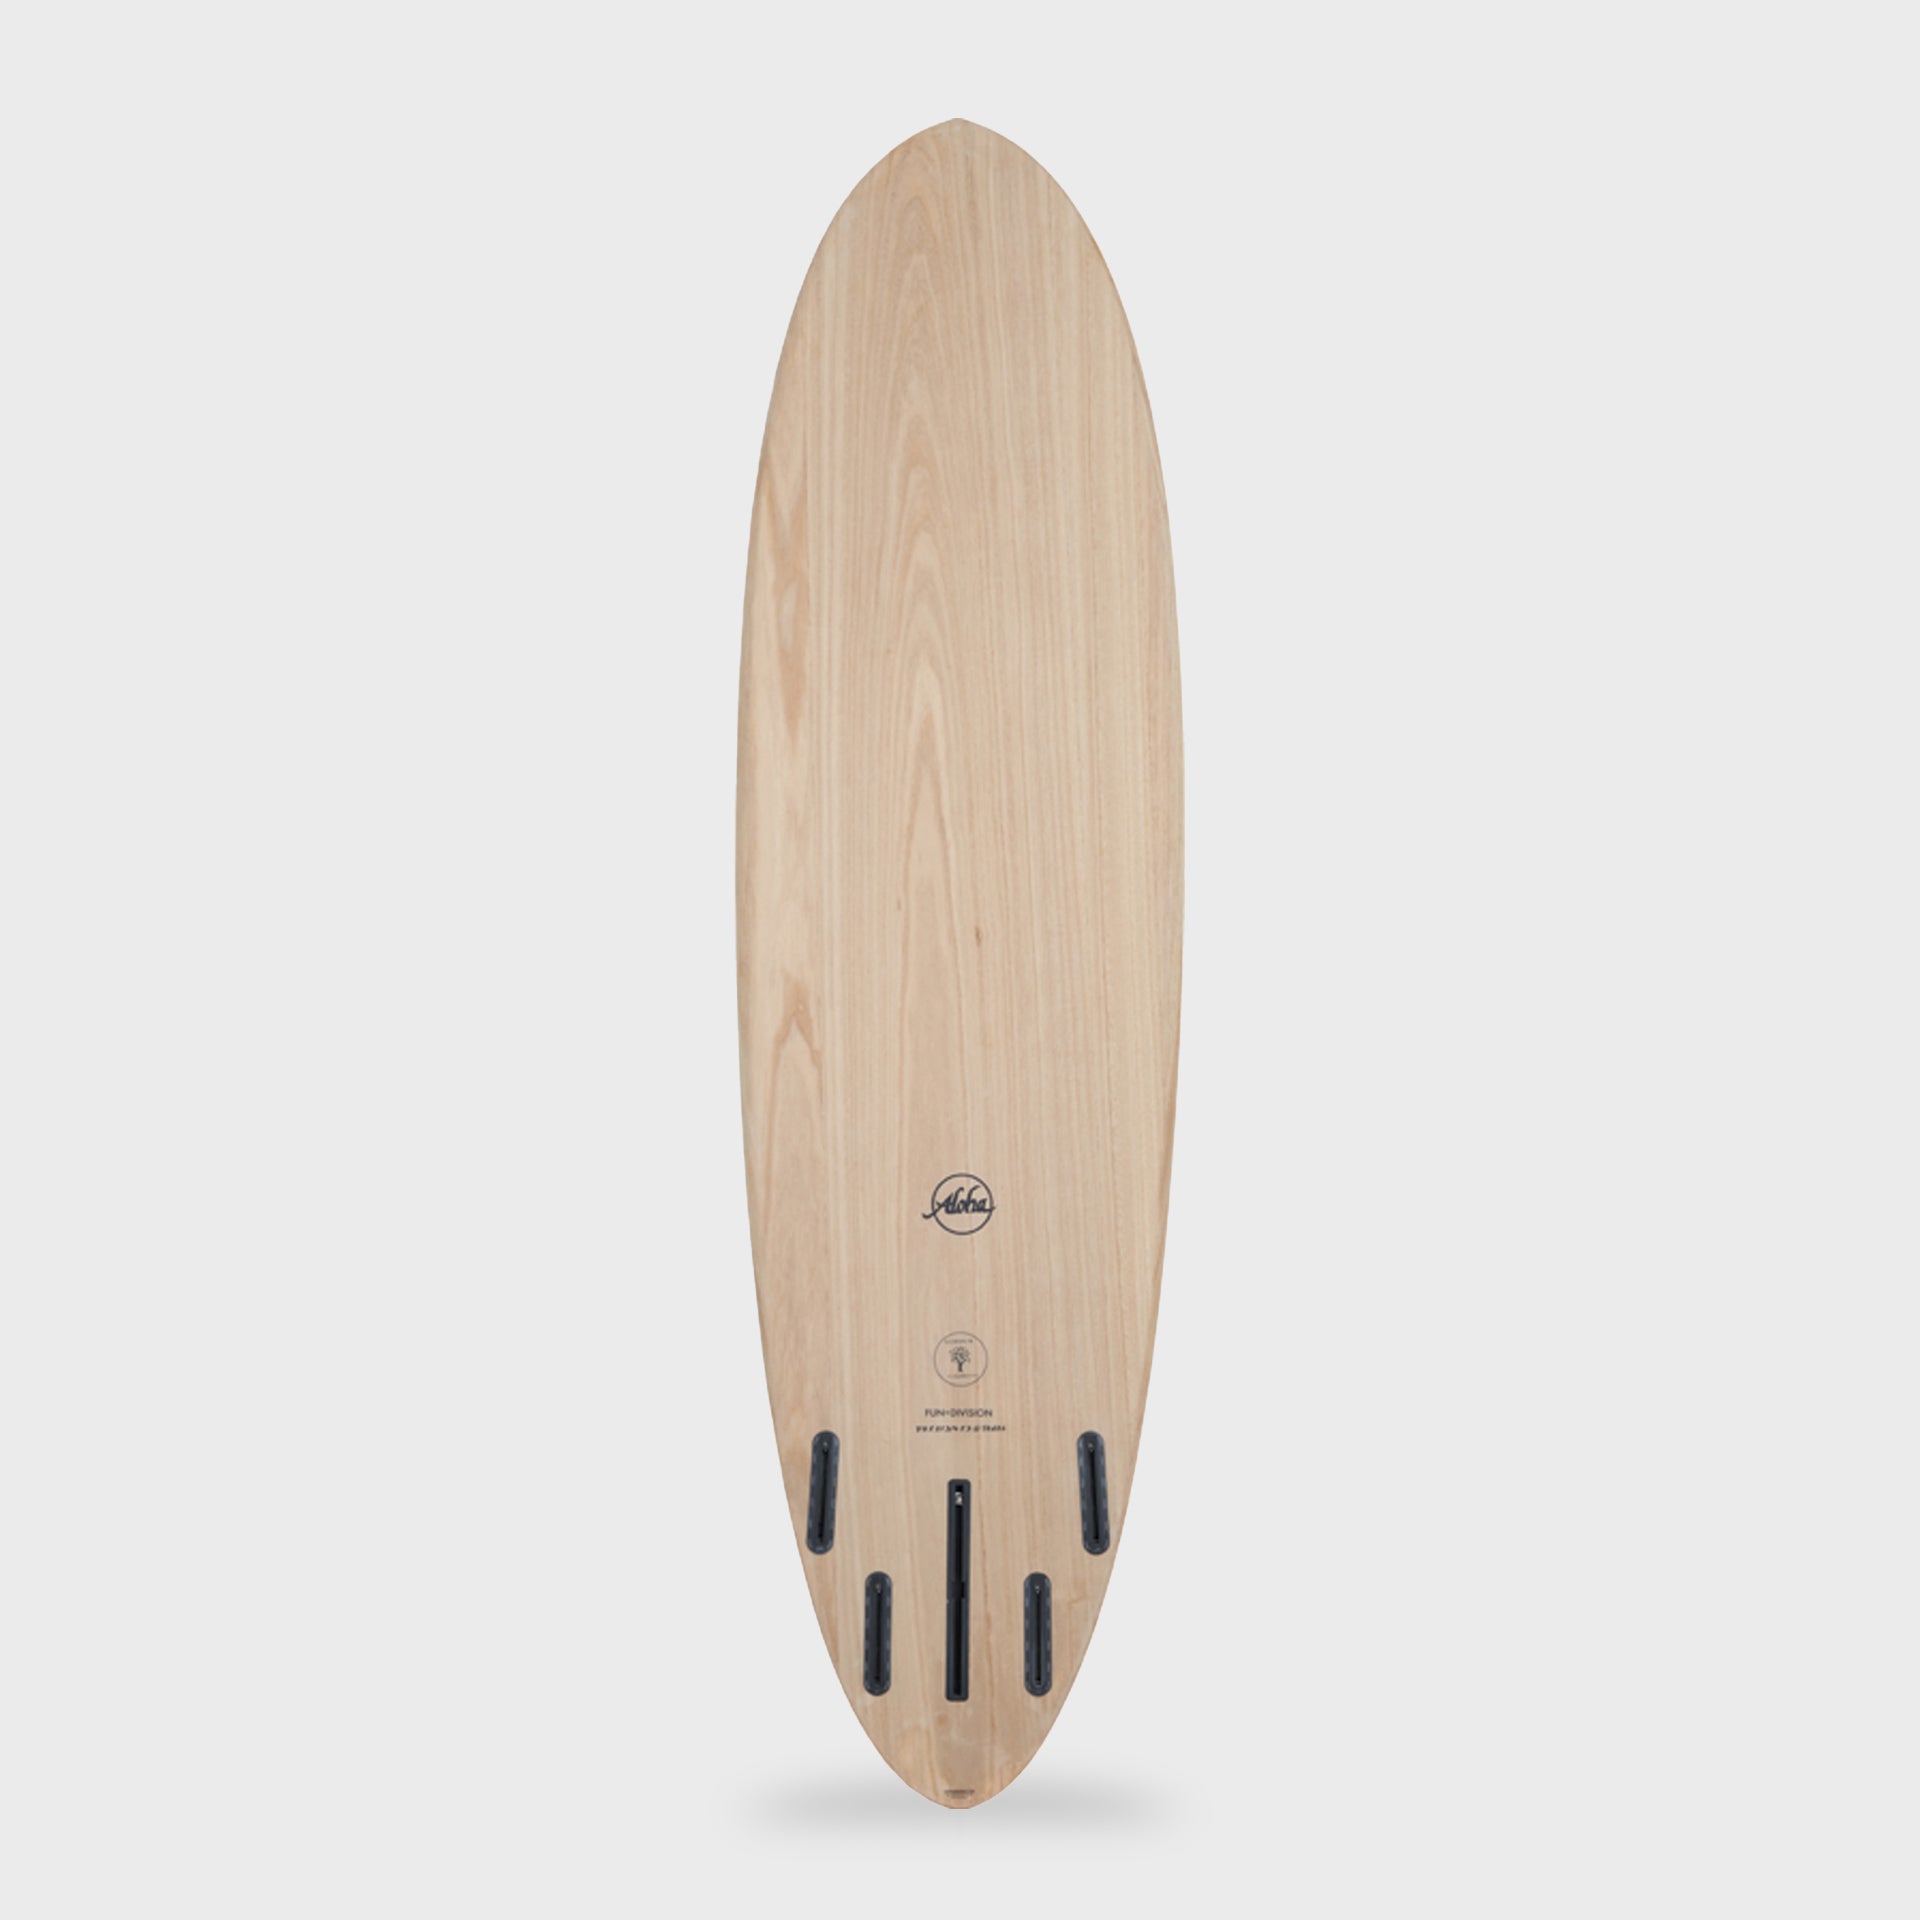 Fun Division Ecoskin - Surfboard - 6'8, 7'0, 7'6 and 8'0 - Clear - ManGo Surfing